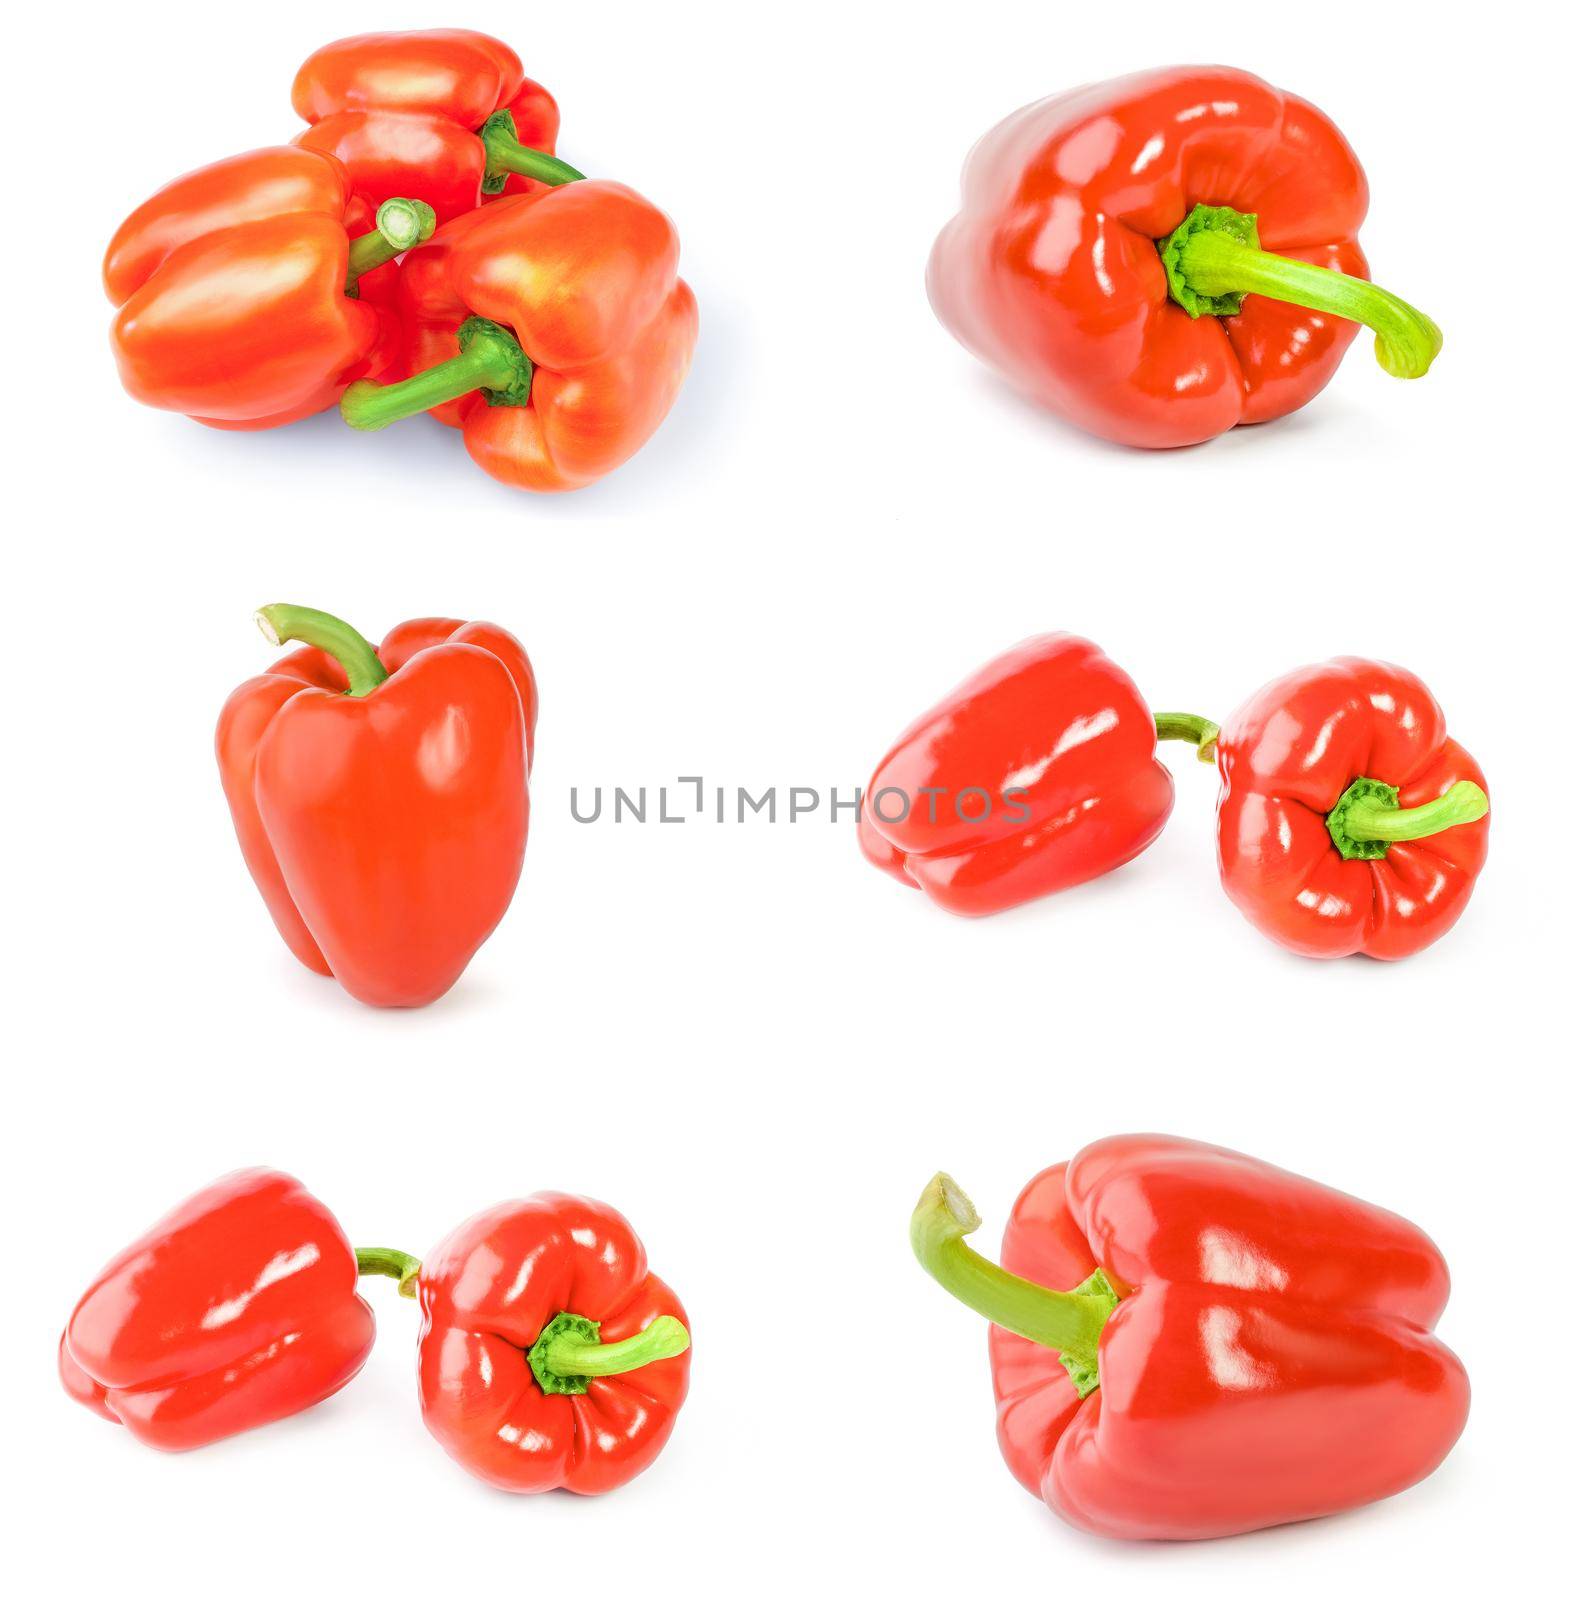 Collage of sweet peppers on a white background clipping path by Proff